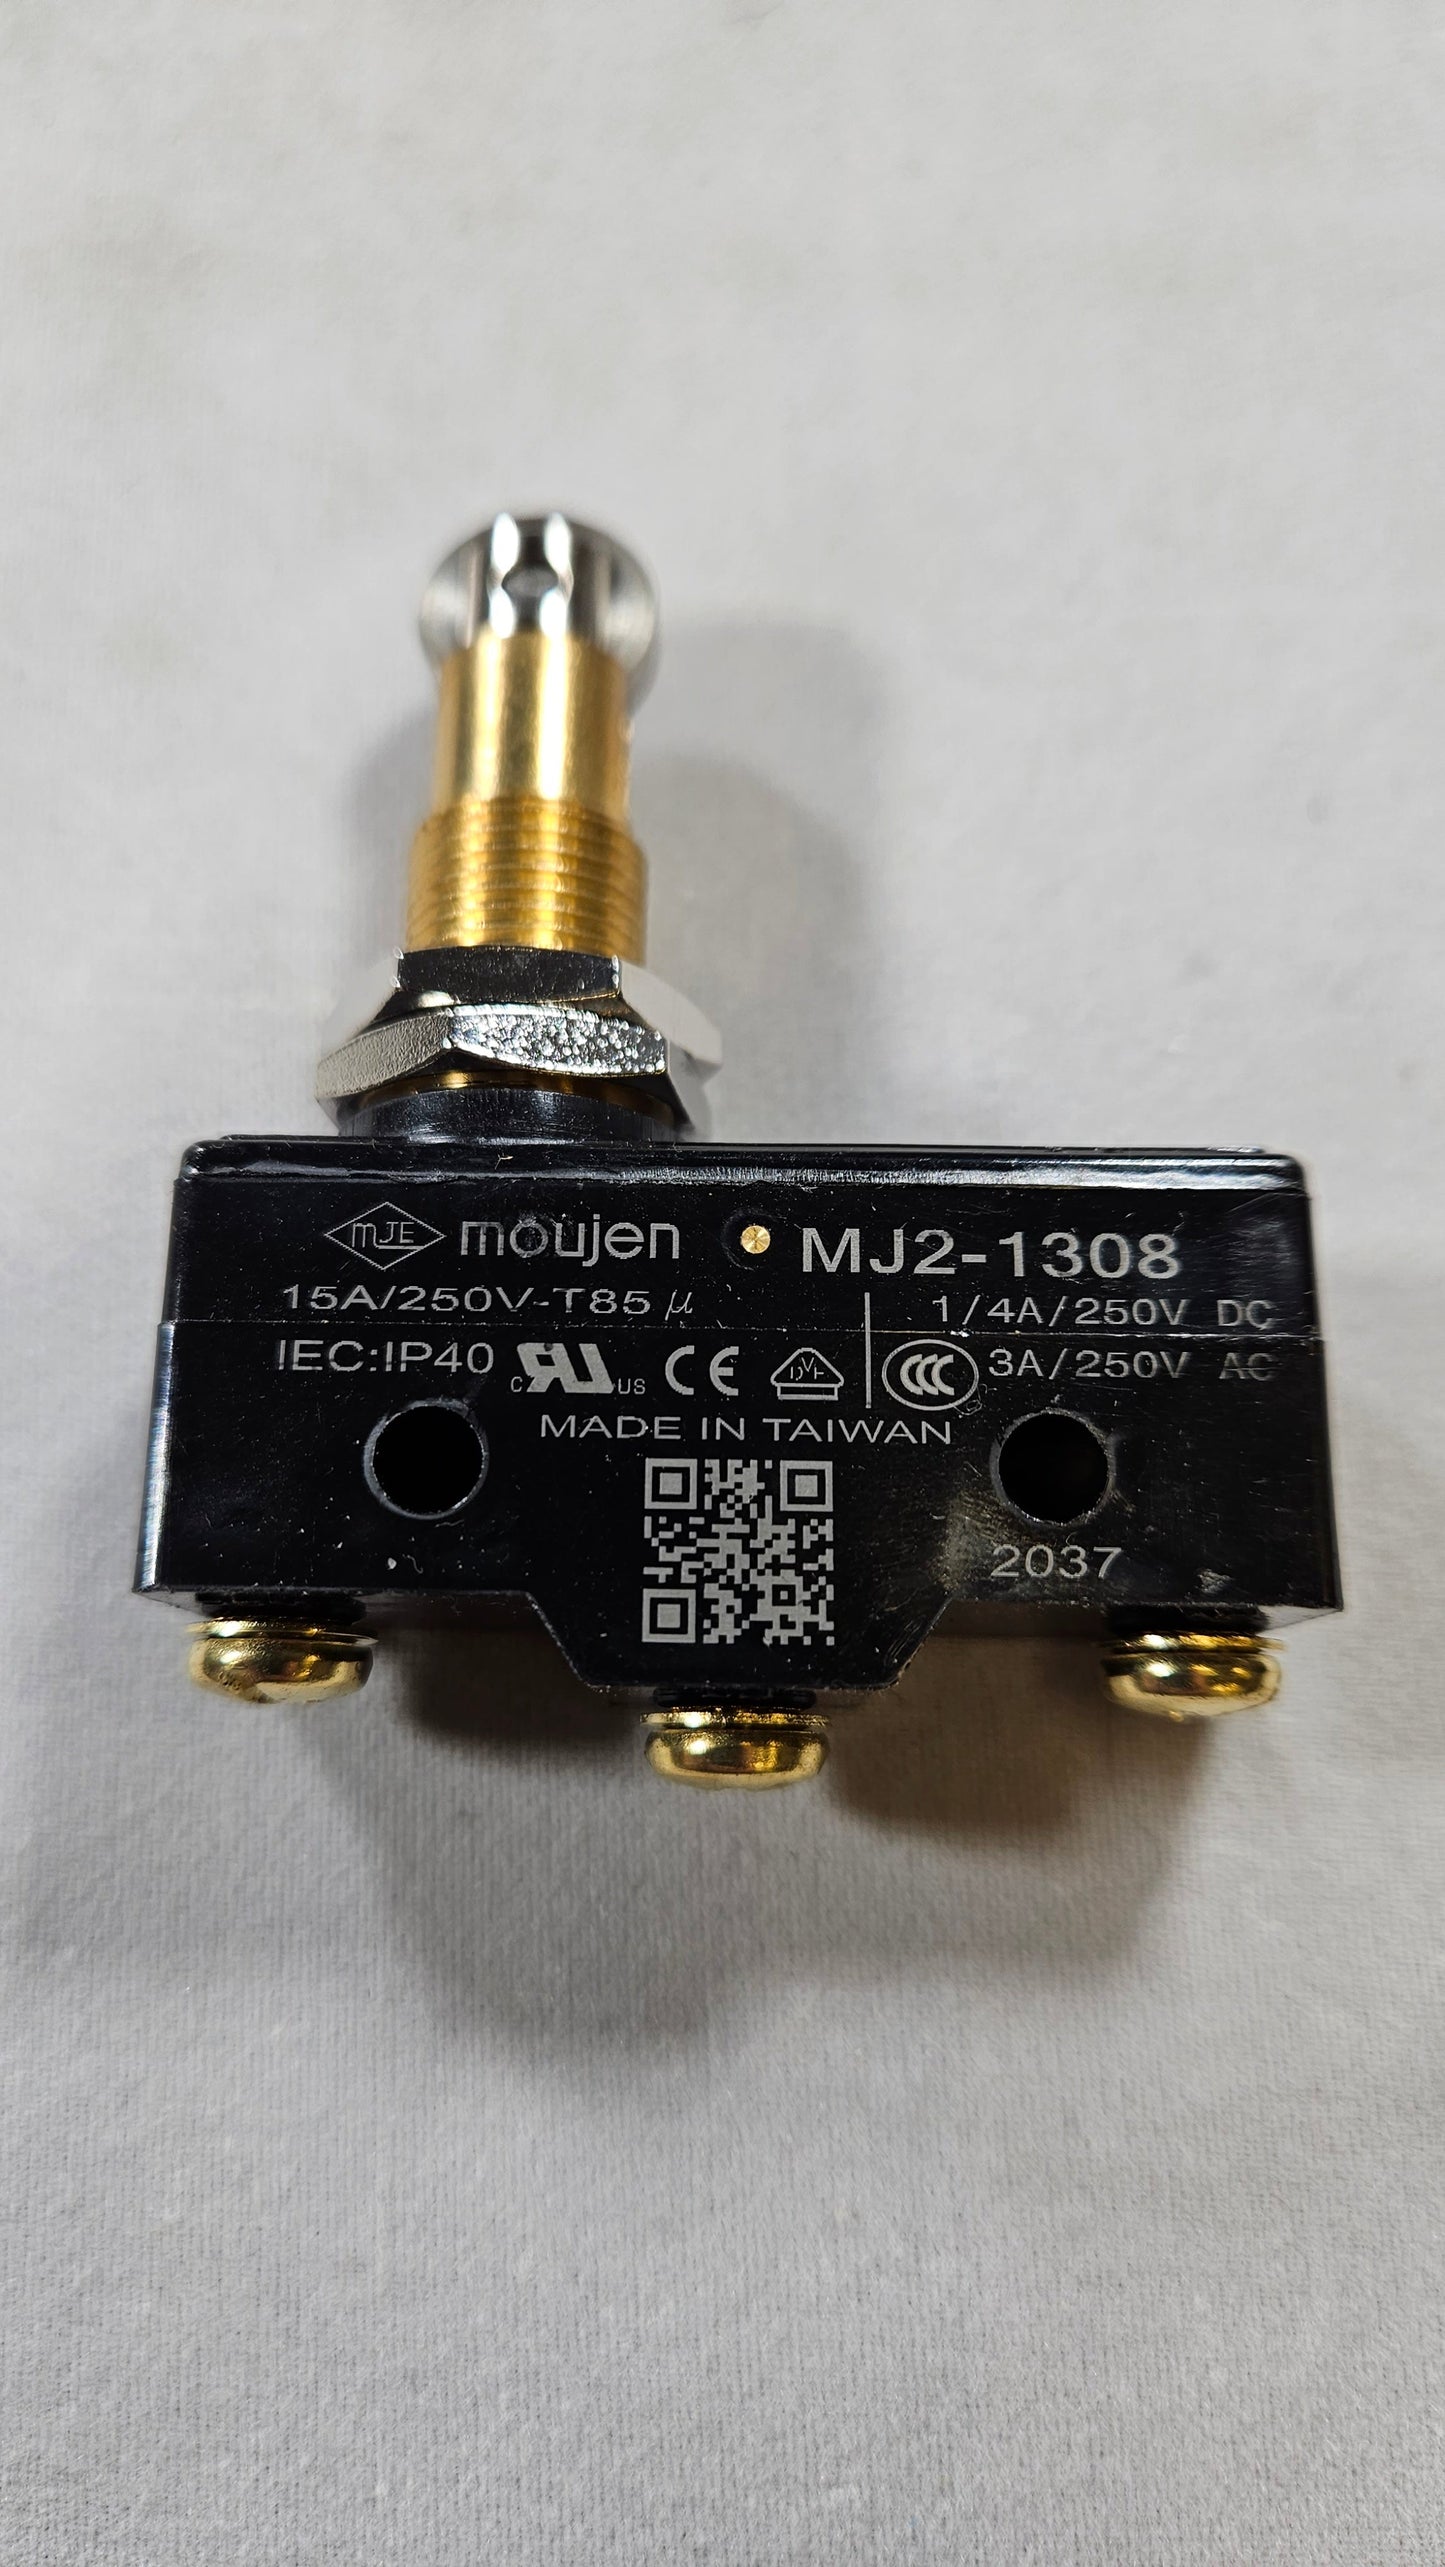 SW-ENCLOSED LIMIT SWITCHES (MJ2-1308)